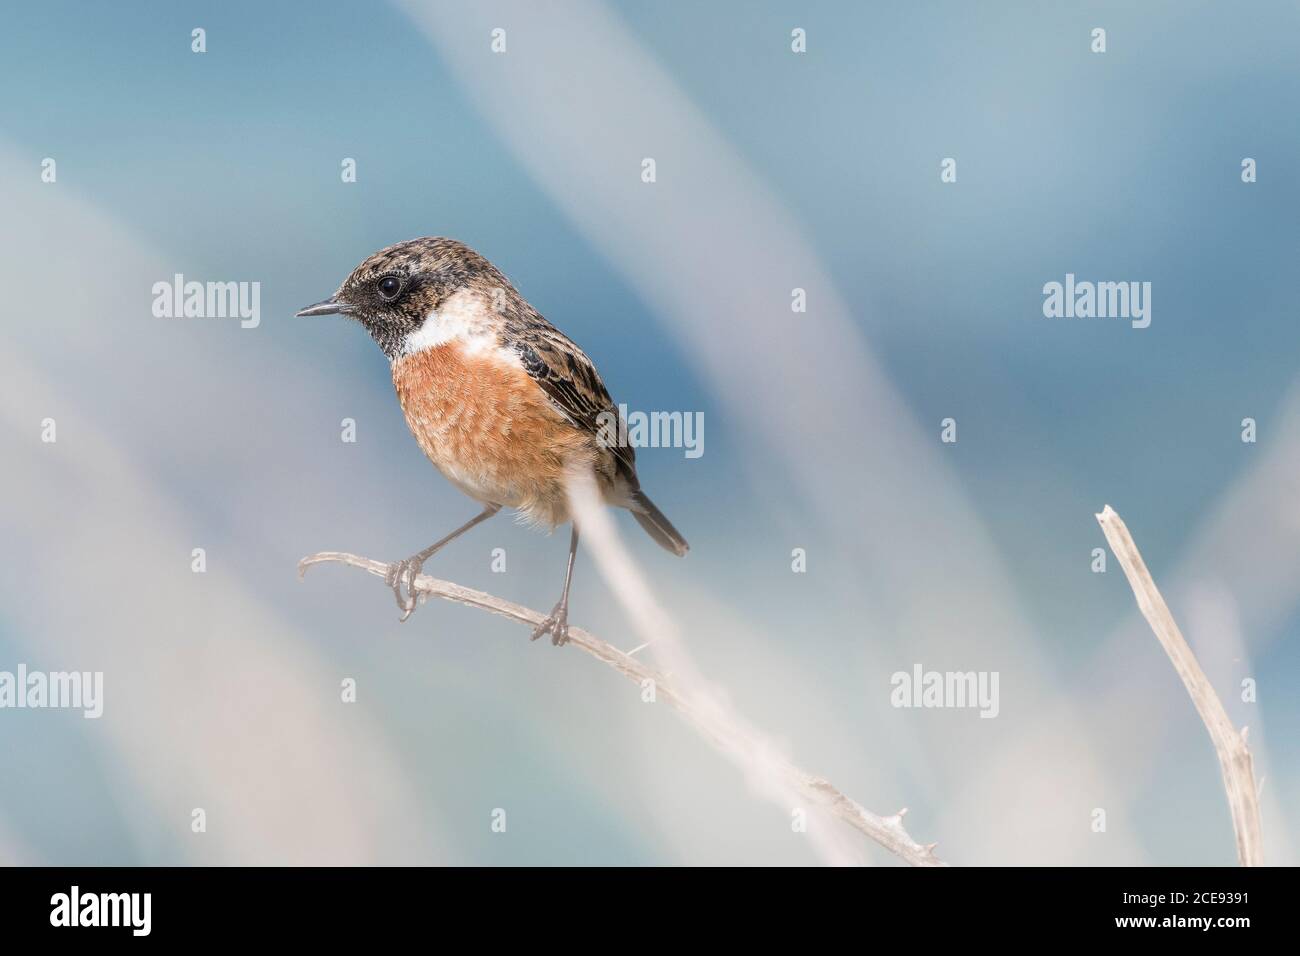 A Stonechat Saxicola rubicola perched on the twig of a bush. Stock Photo